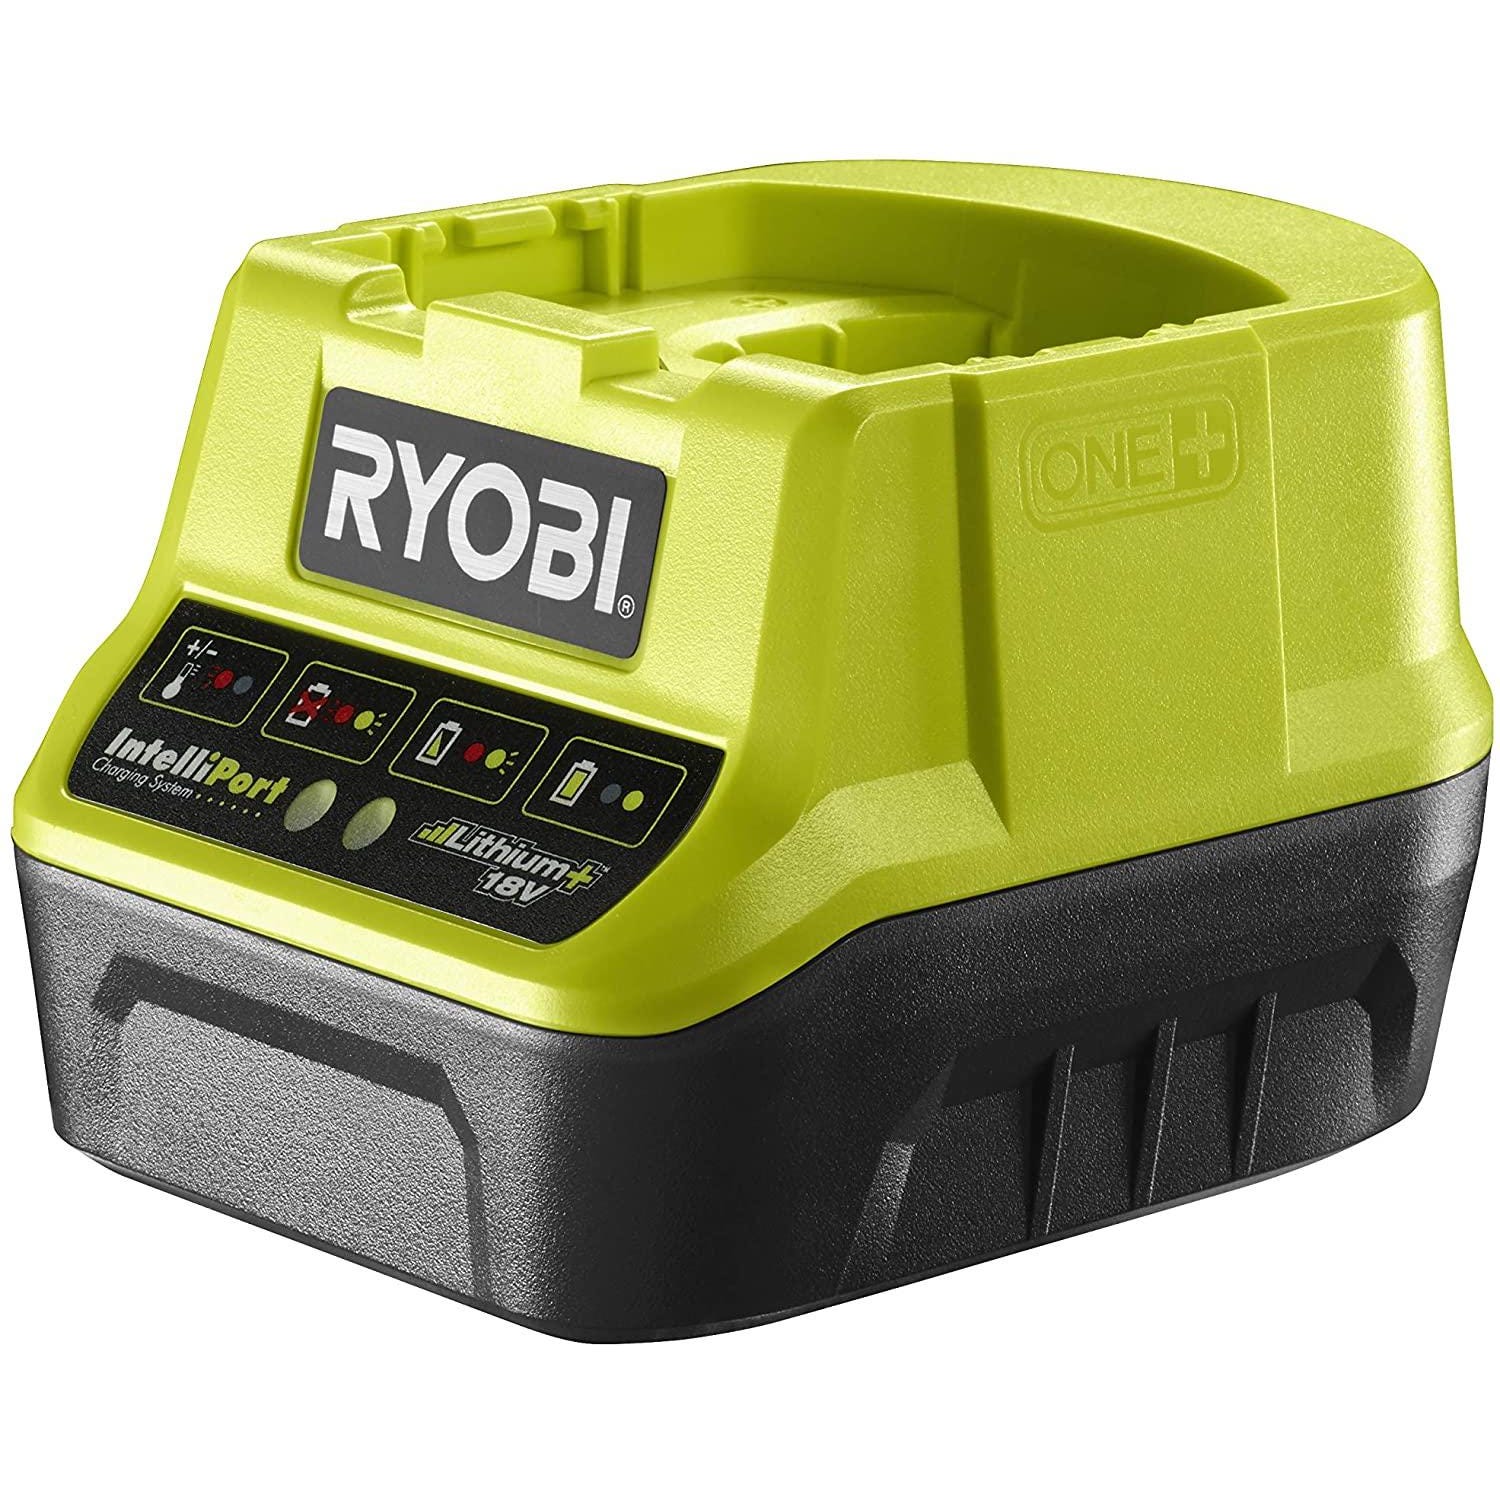 Chargeur rapide RYOBI 18V 2.0Ah One+ Lithium-ion RC18120 3